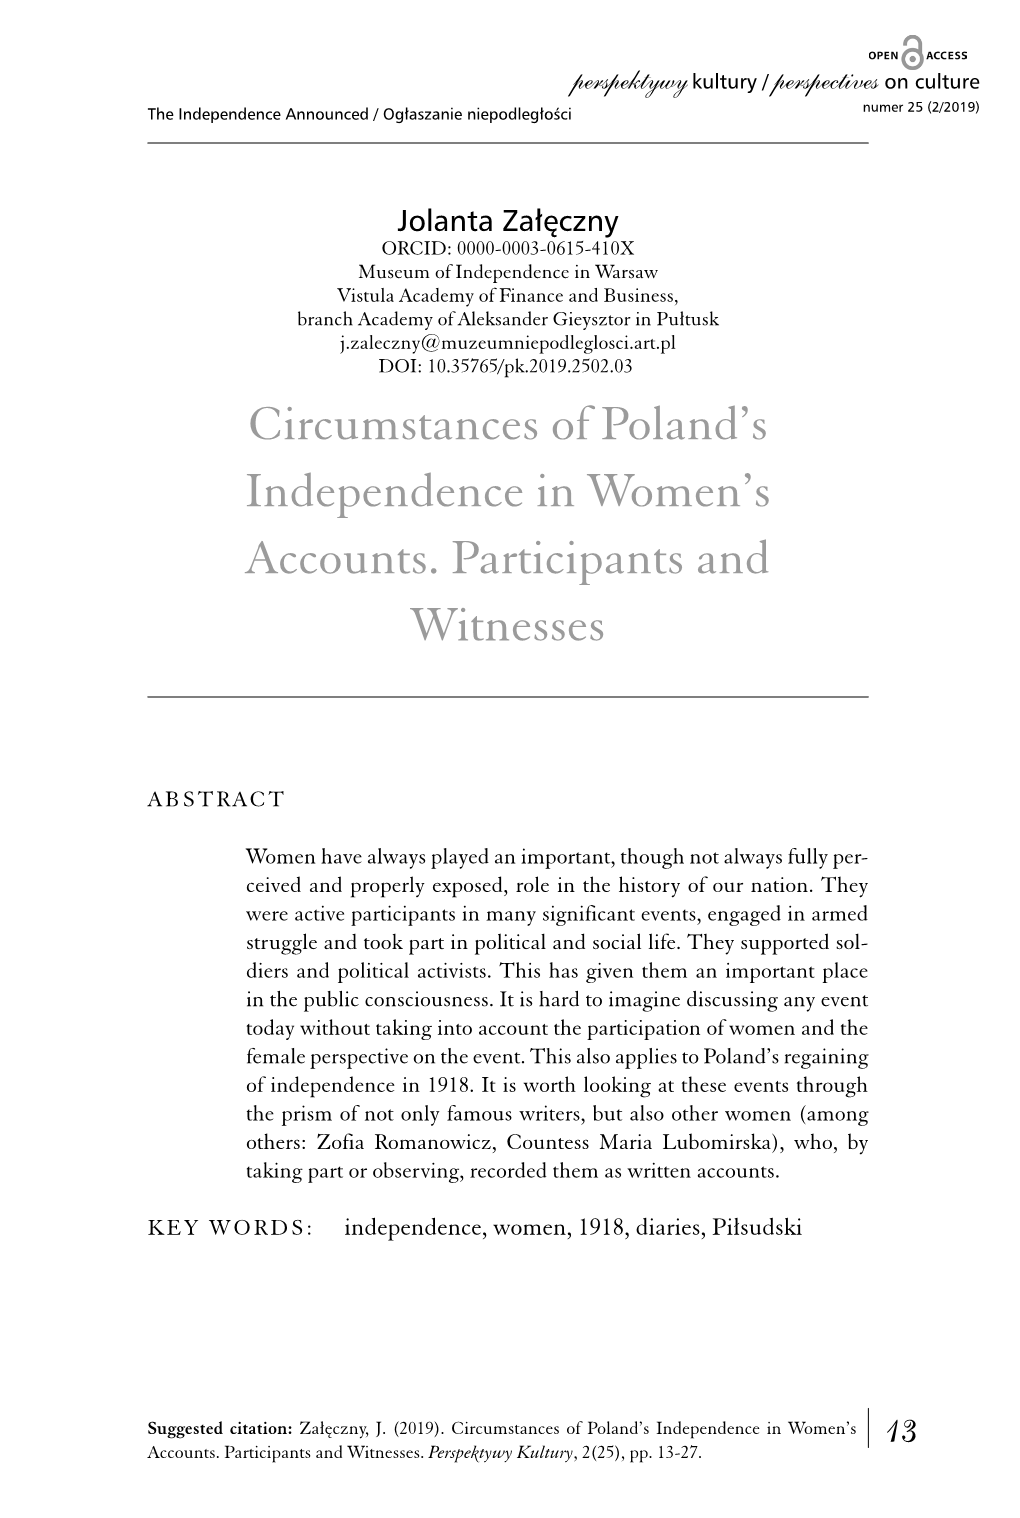 Circumstances of Poland's Independence in Women's